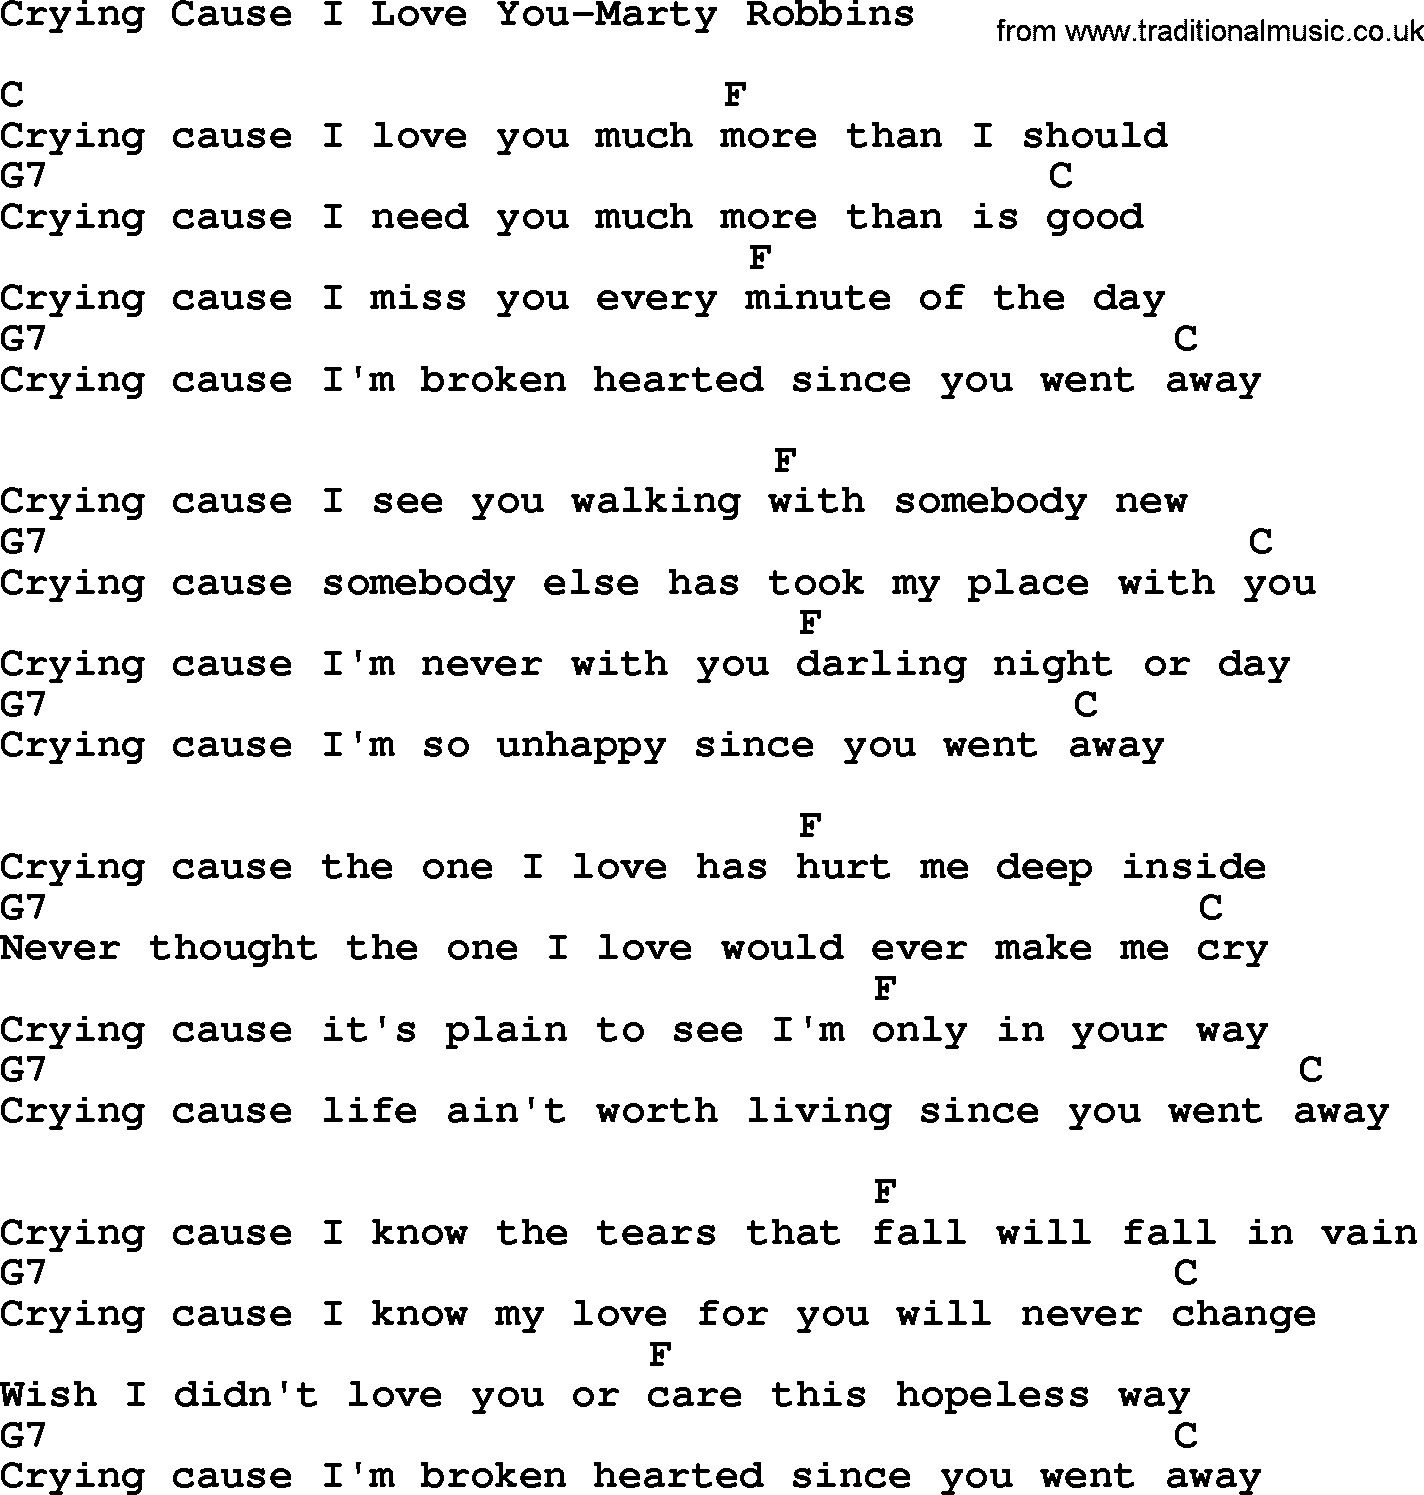 Country music song: Crying Cause I Love You-Marty Robbins lyrics and chords